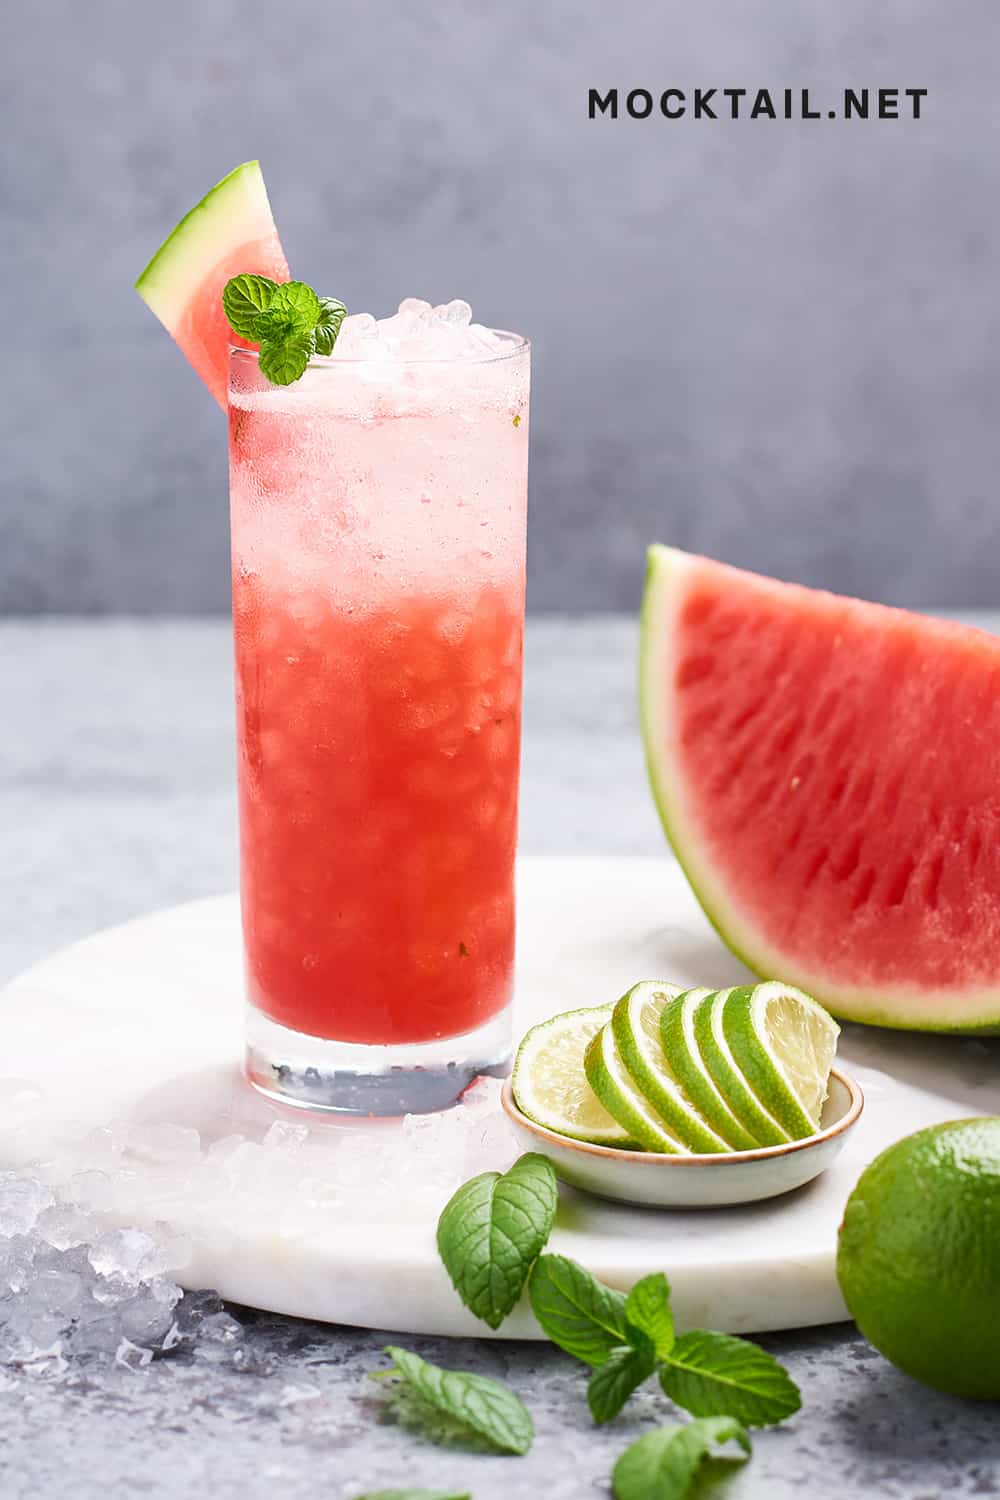 we prefer to skip the alcohol and make a delicious mocktail instead.